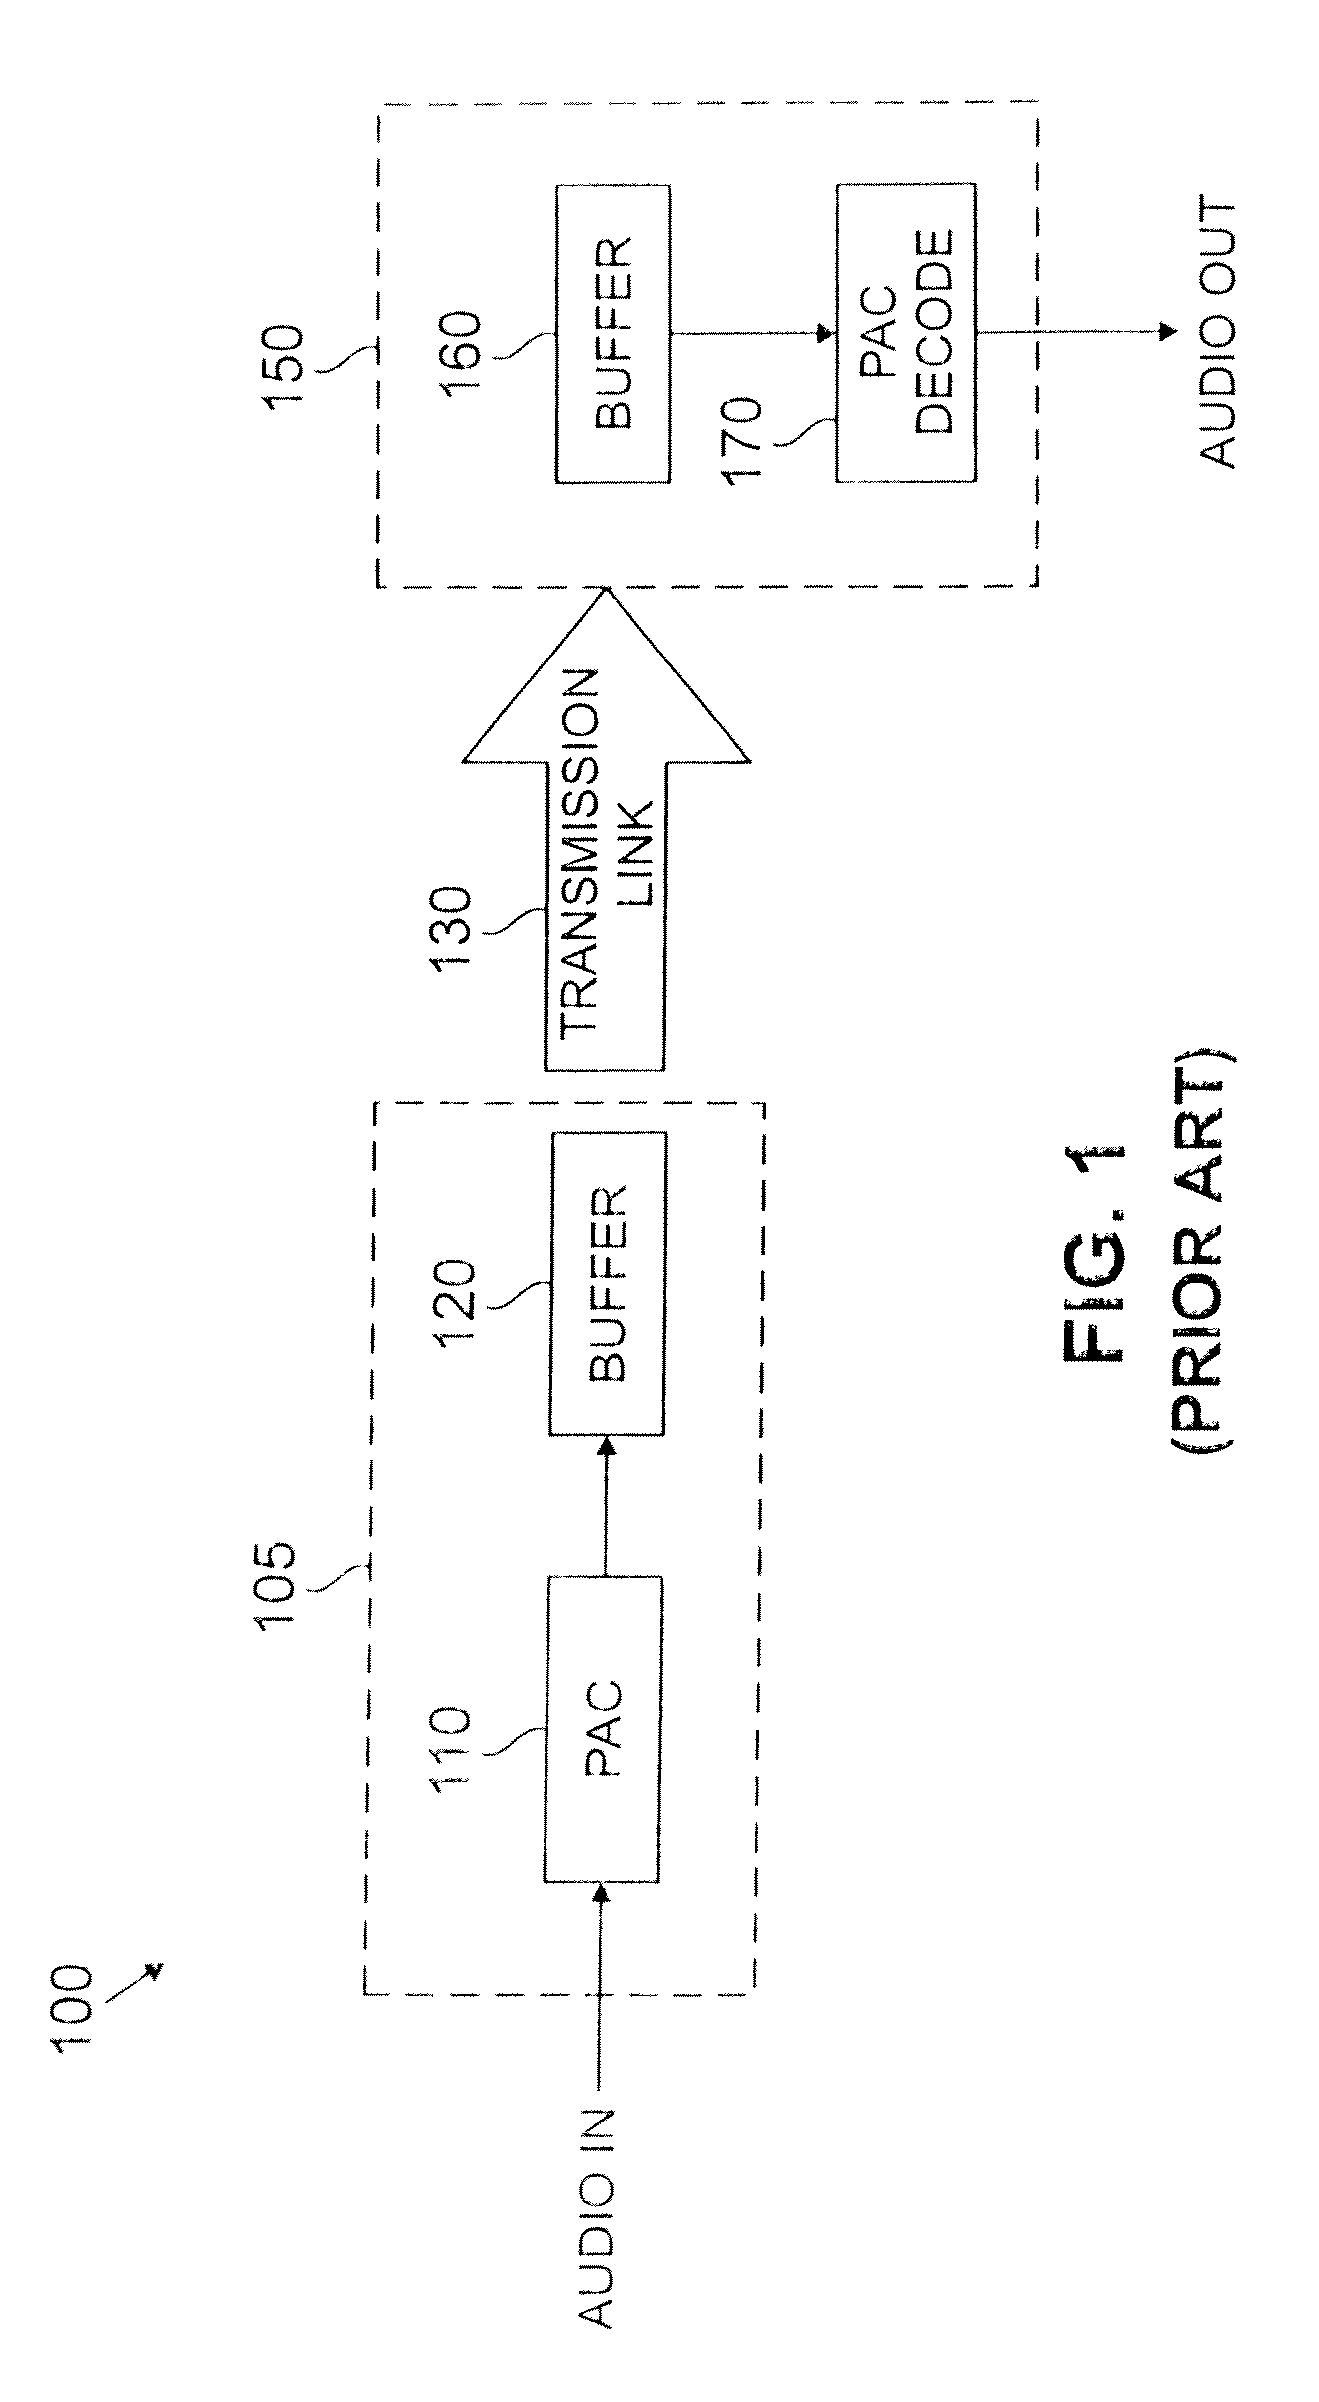 Method And Apparatus For Controlling Buffer Overflow In A Communication System